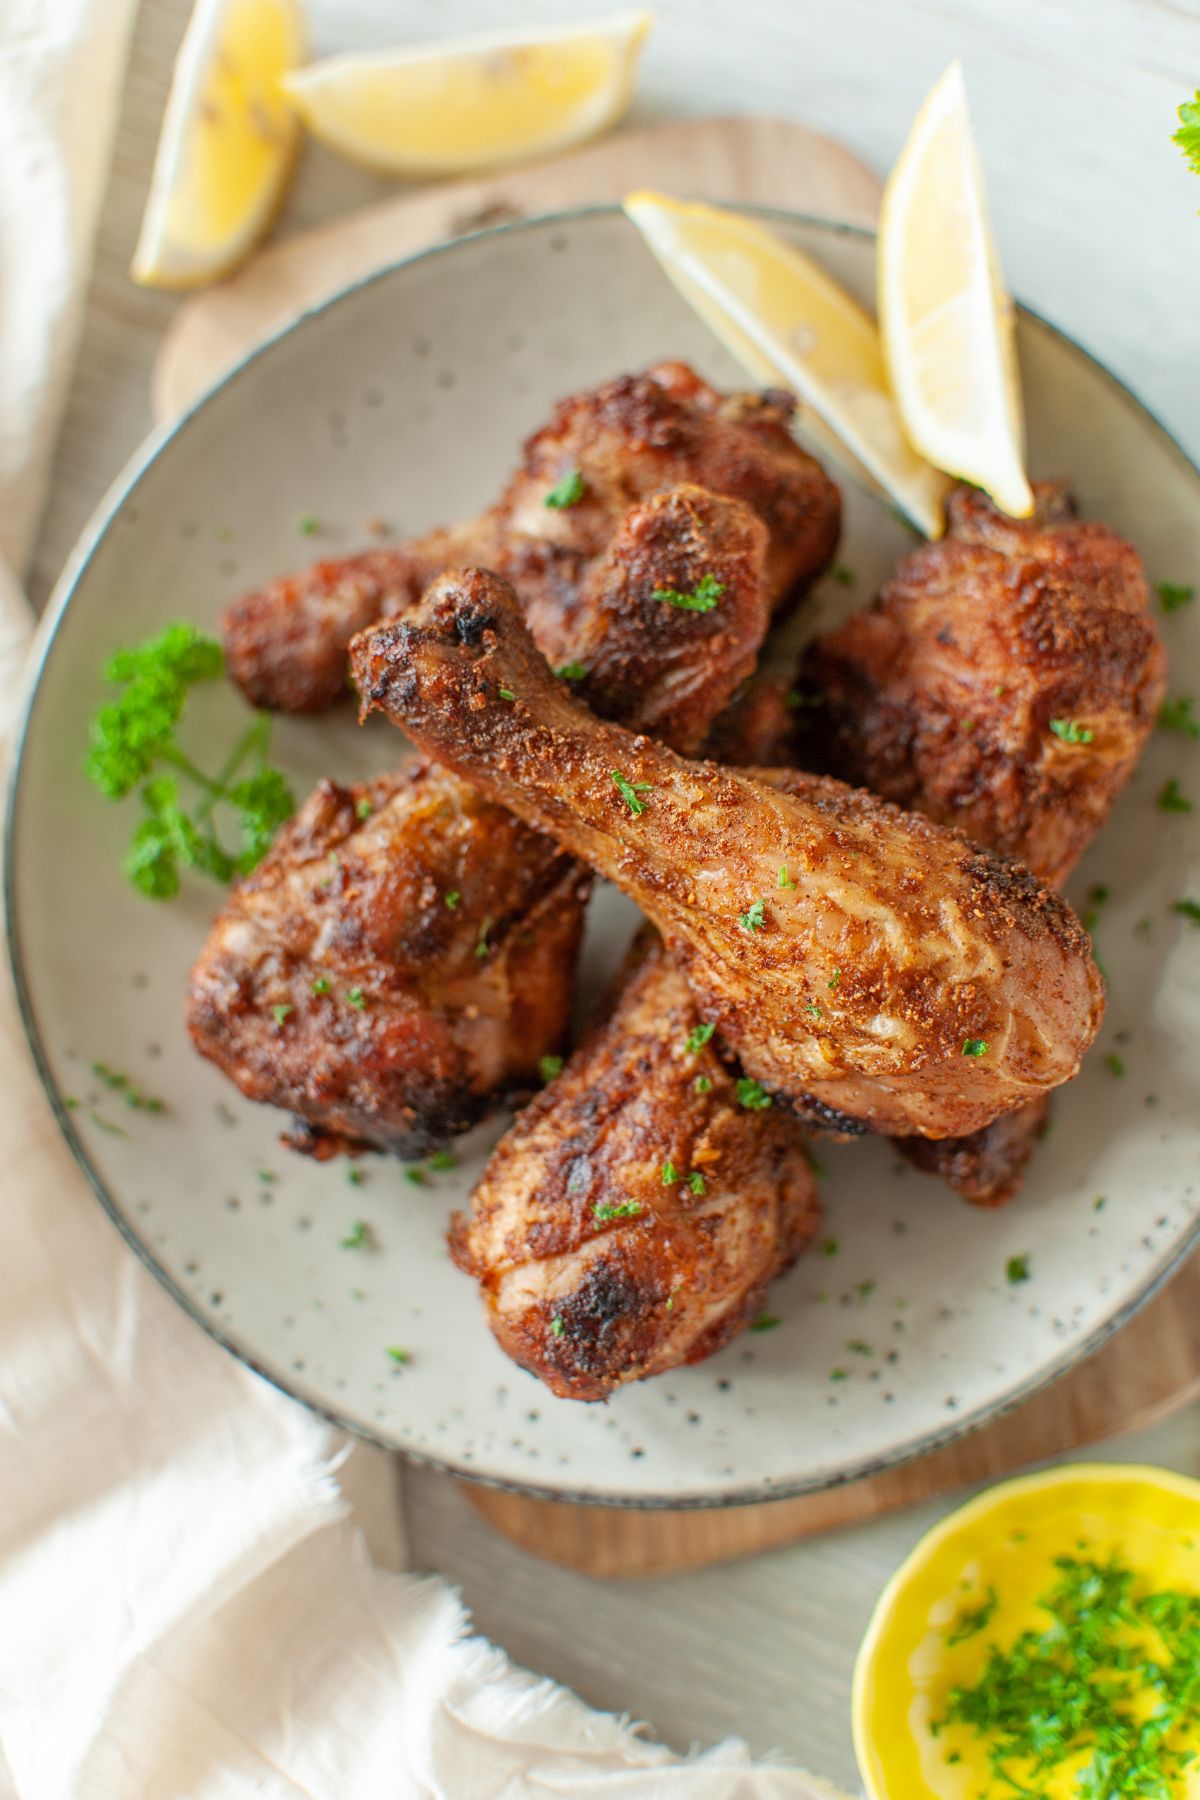 Fried Chicken Legs plated with slices of lemon